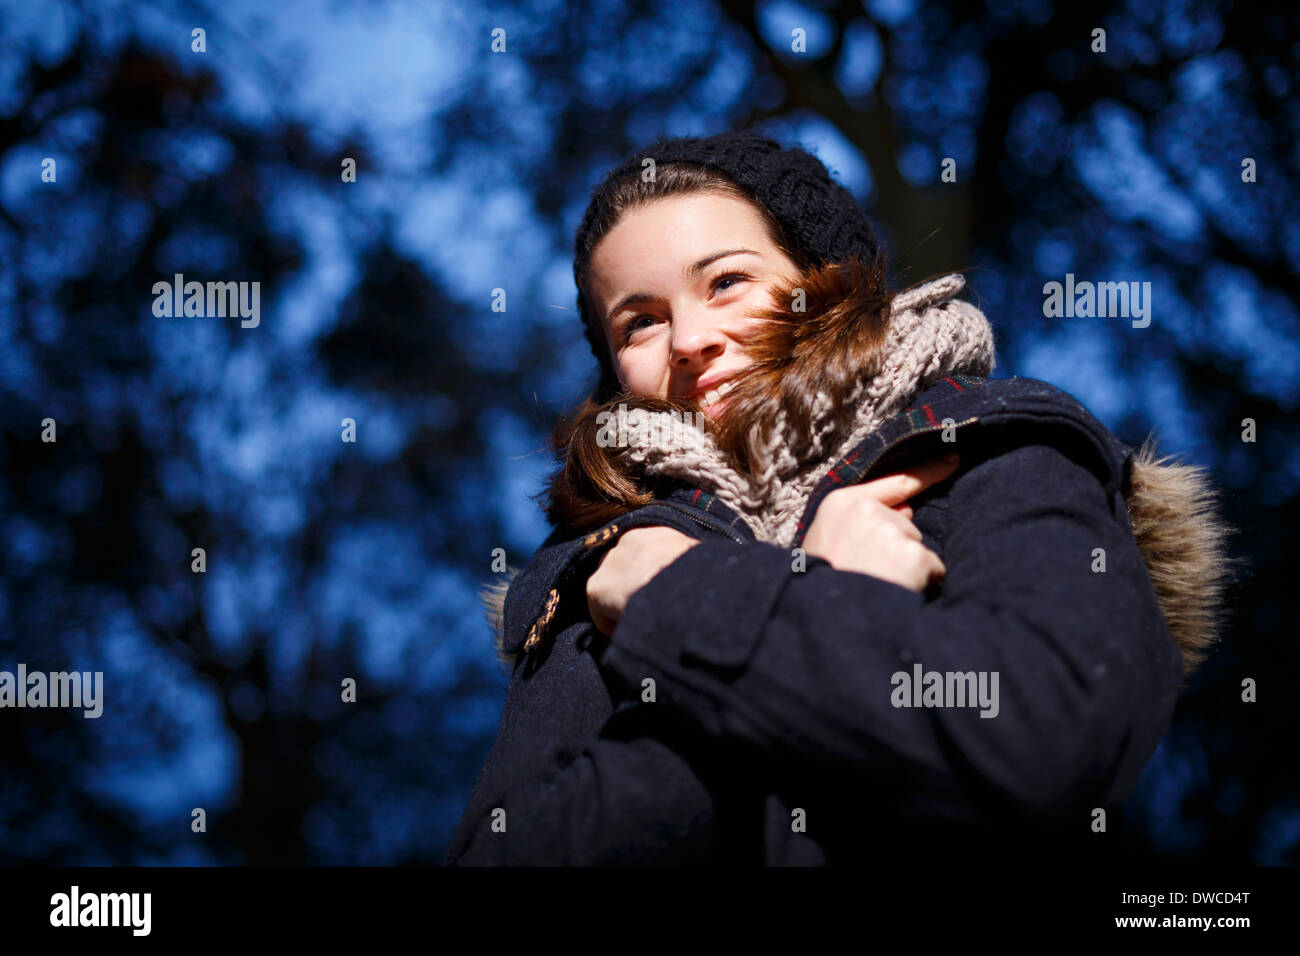 Teenage girl in forest at dusk Stock Photo